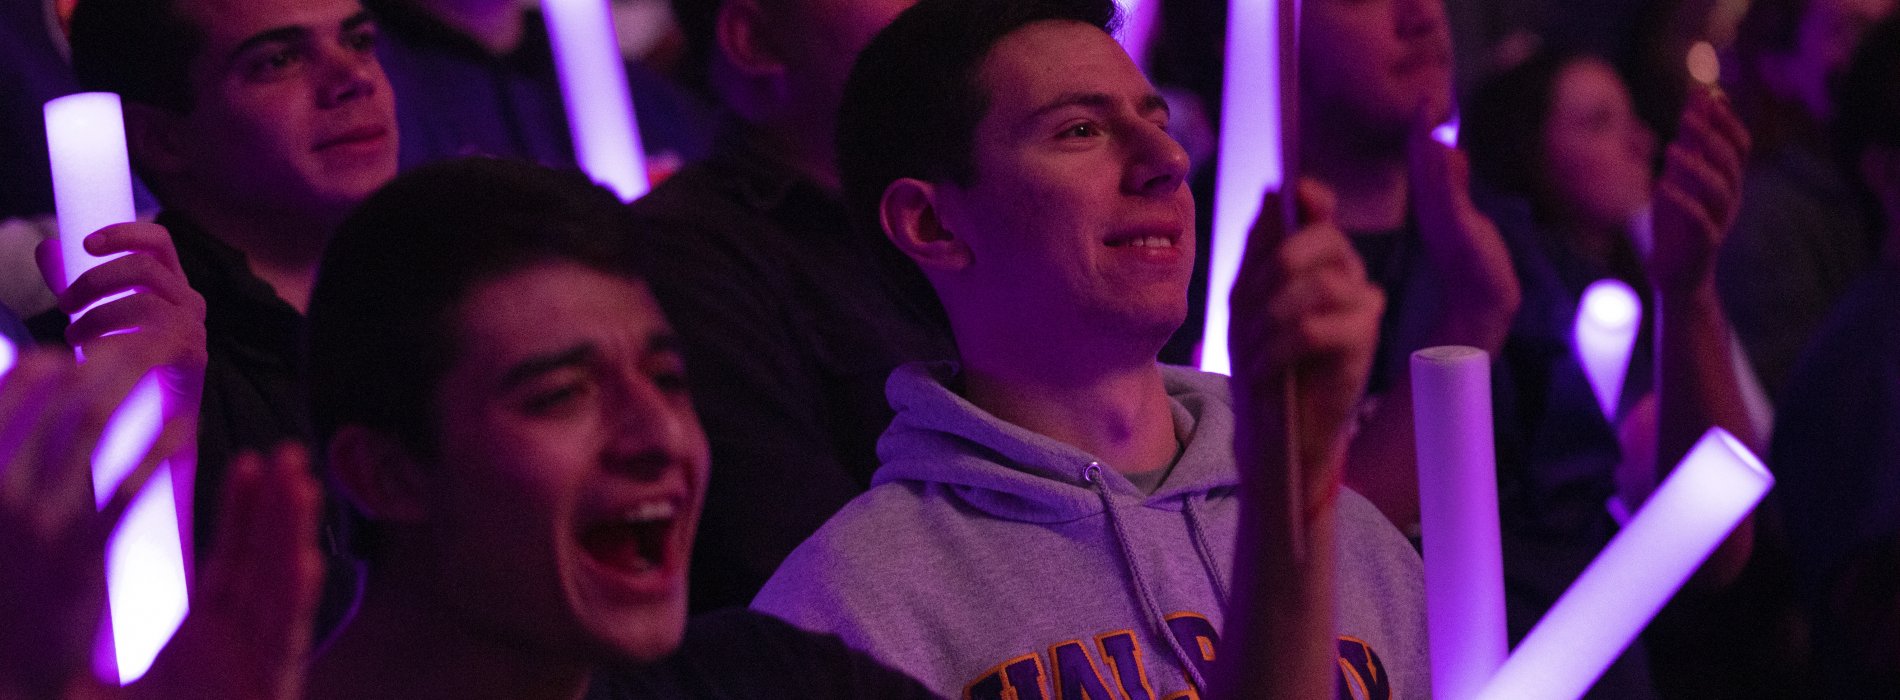 Students hold purple glow sticks as they stand and cheer for a UAlbany team